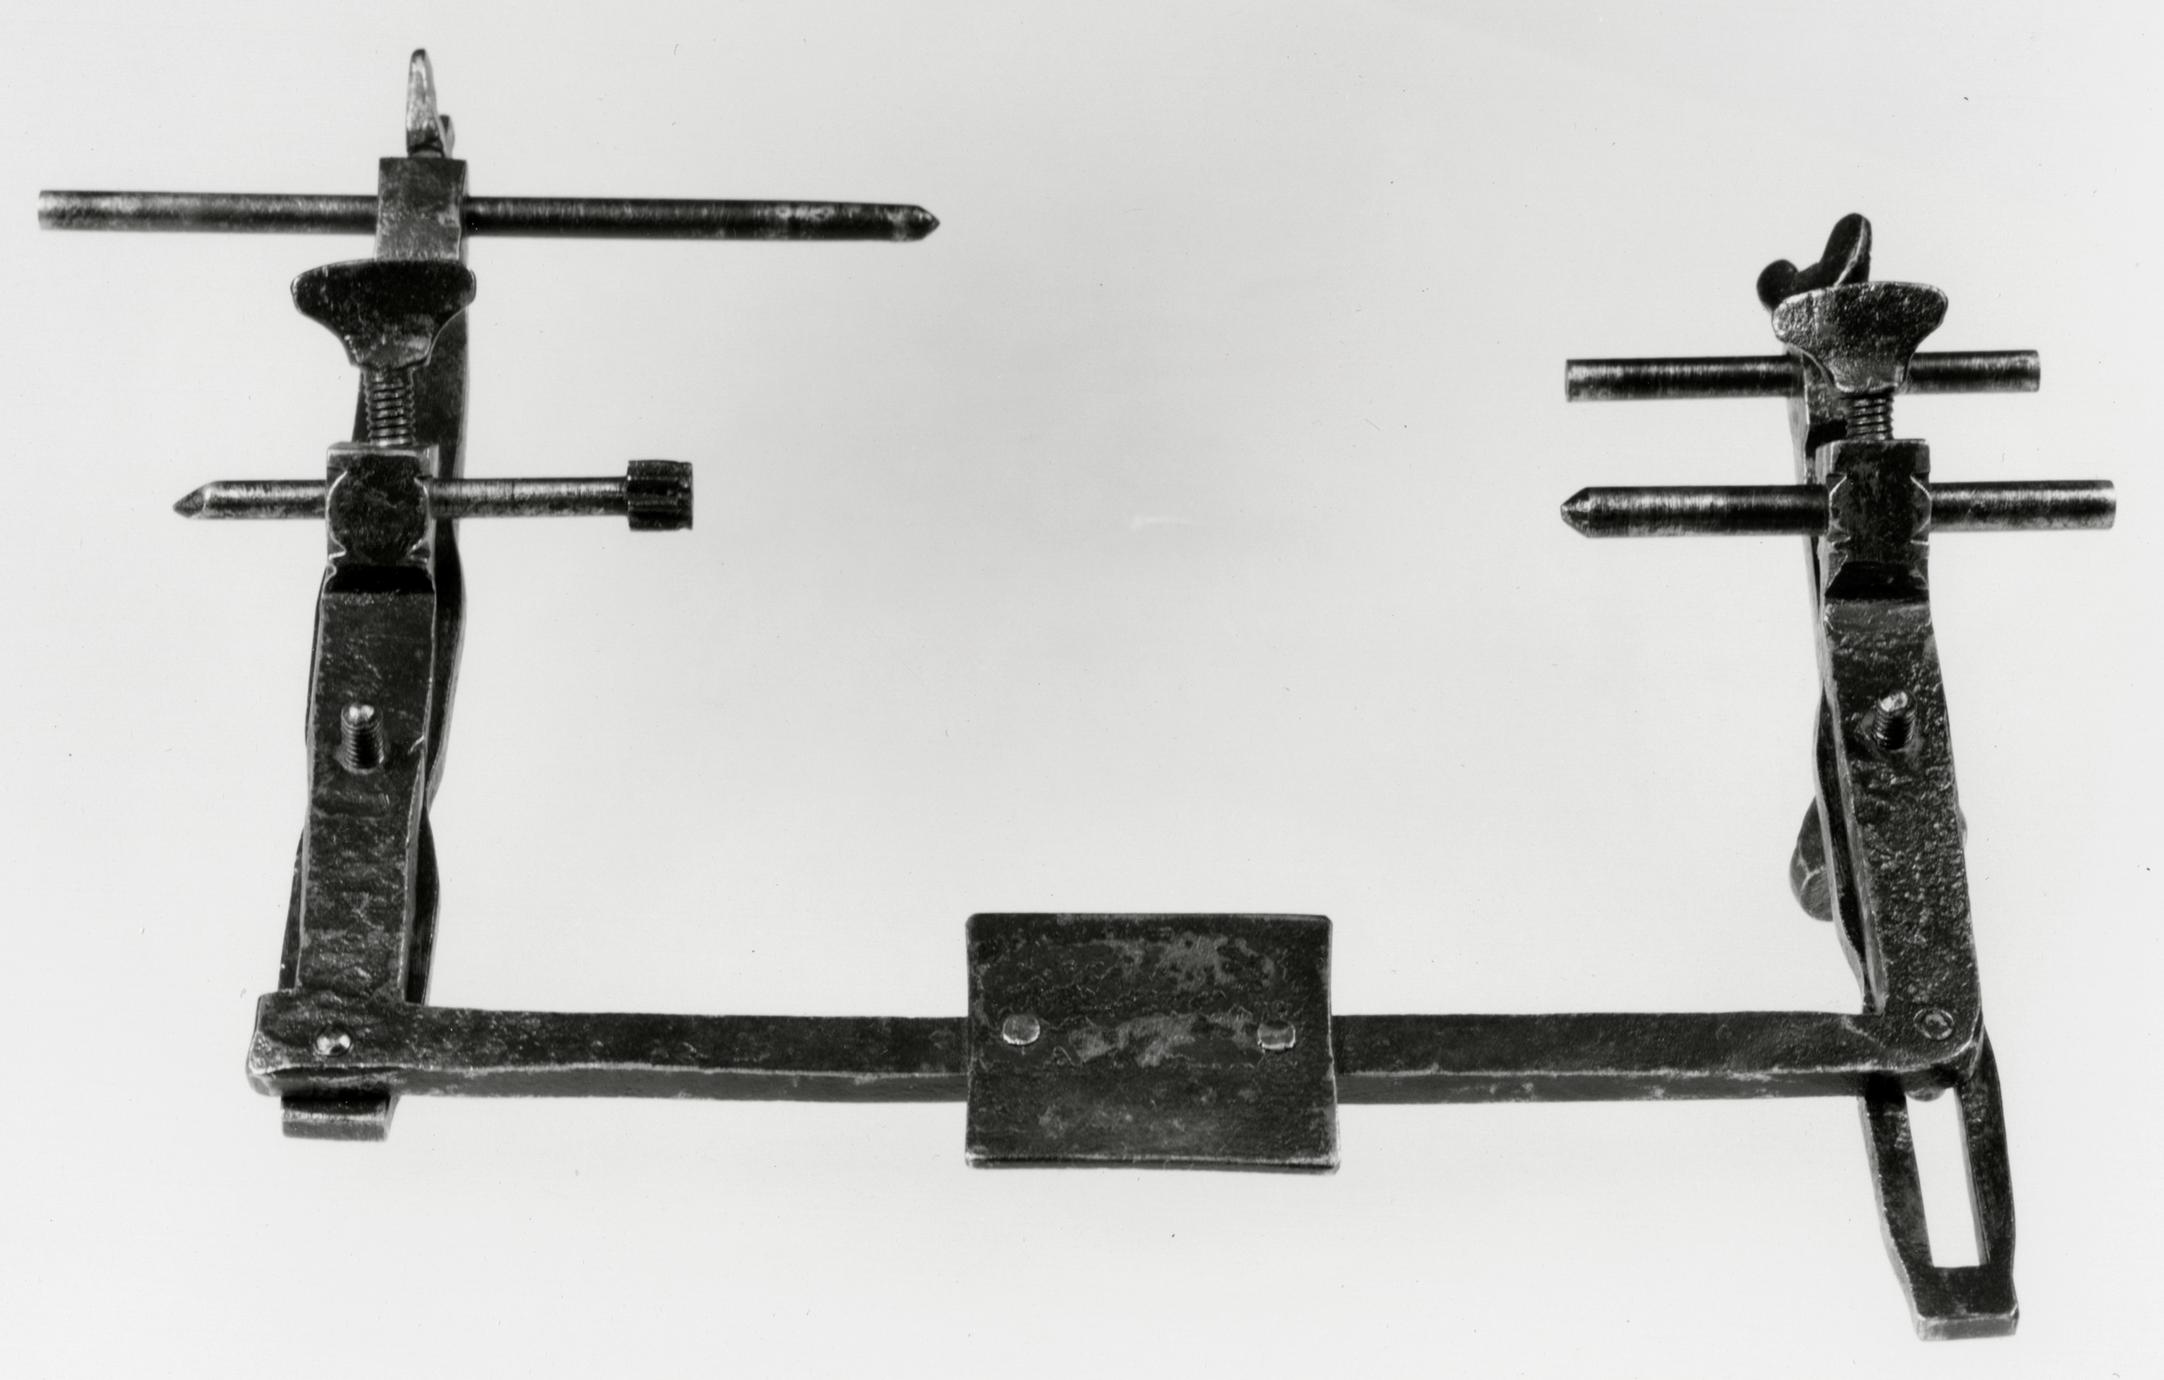 Black and white photograph of a depth gauge ("deepening" or "pitching" tool).